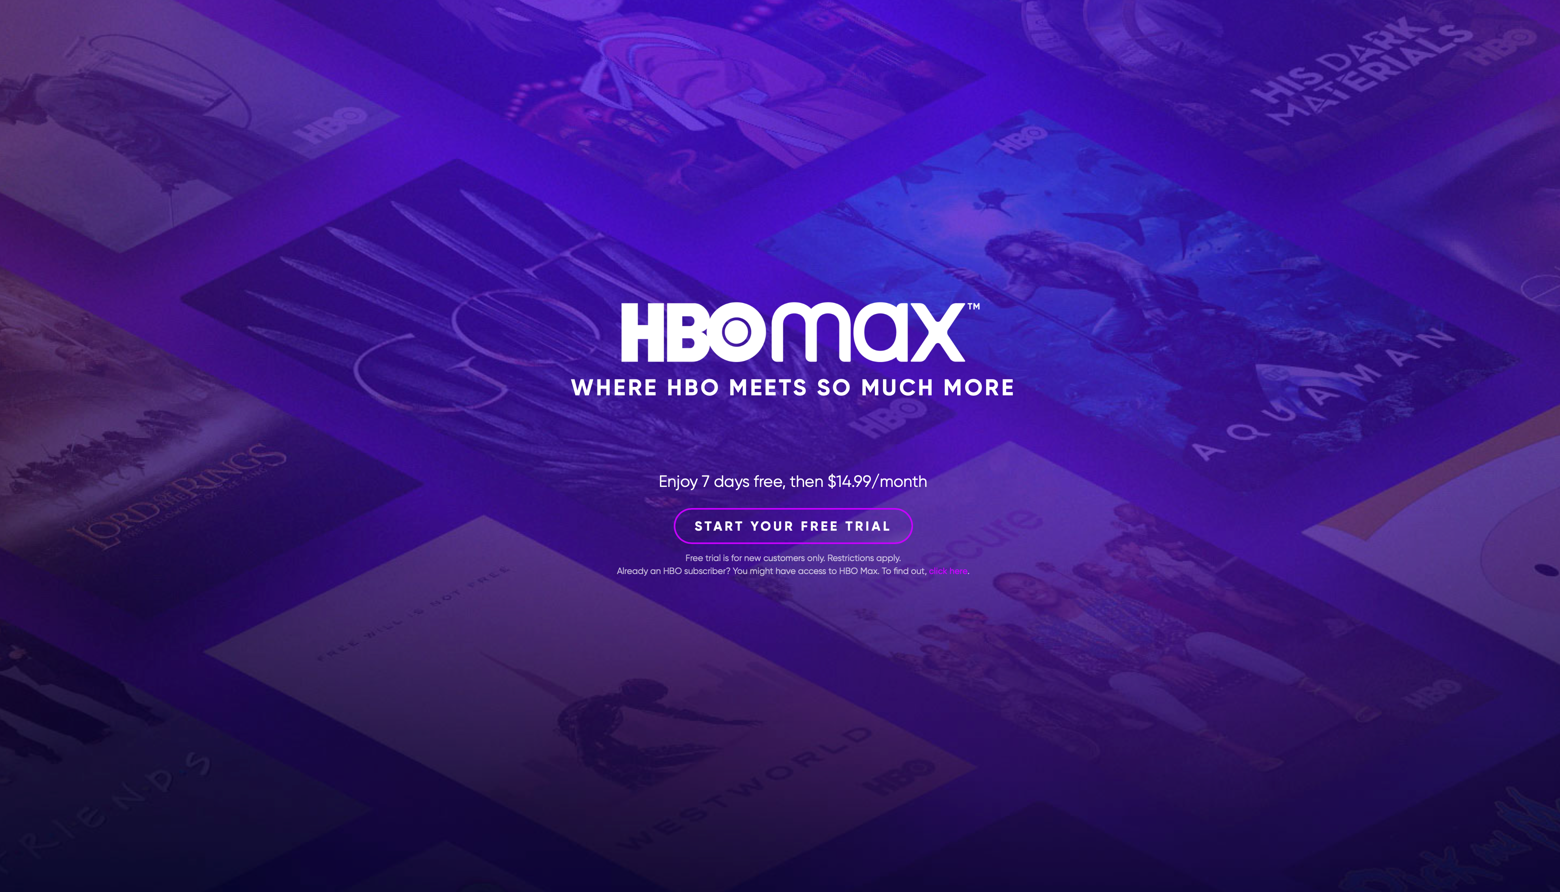 HBO Max brand